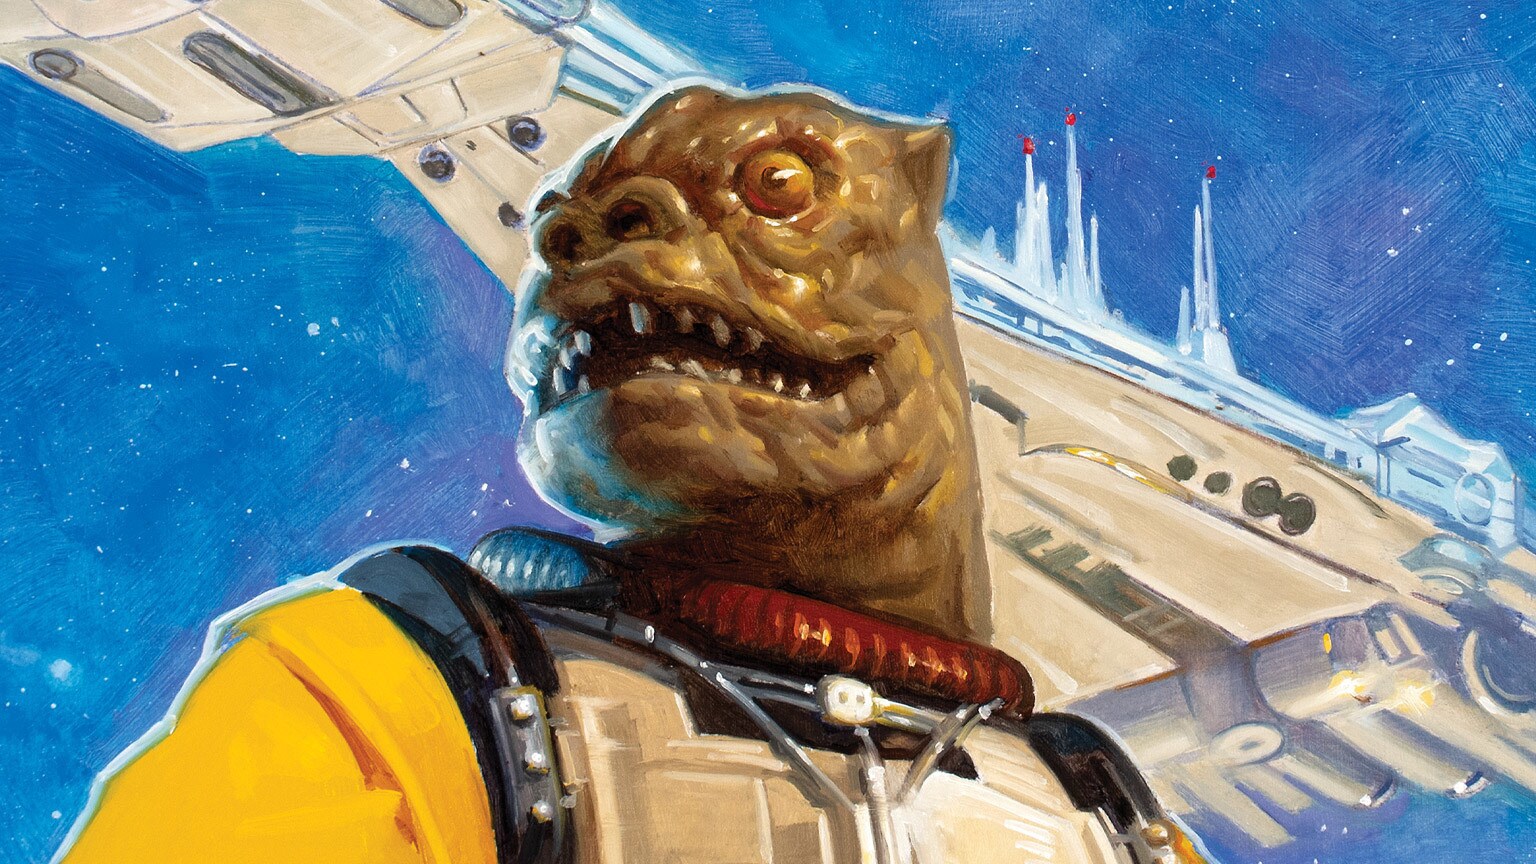 Bossk Sneaks Aboard in Marvel’s Star Wars: Halcyon Legacy #5 - Exclusive Preview